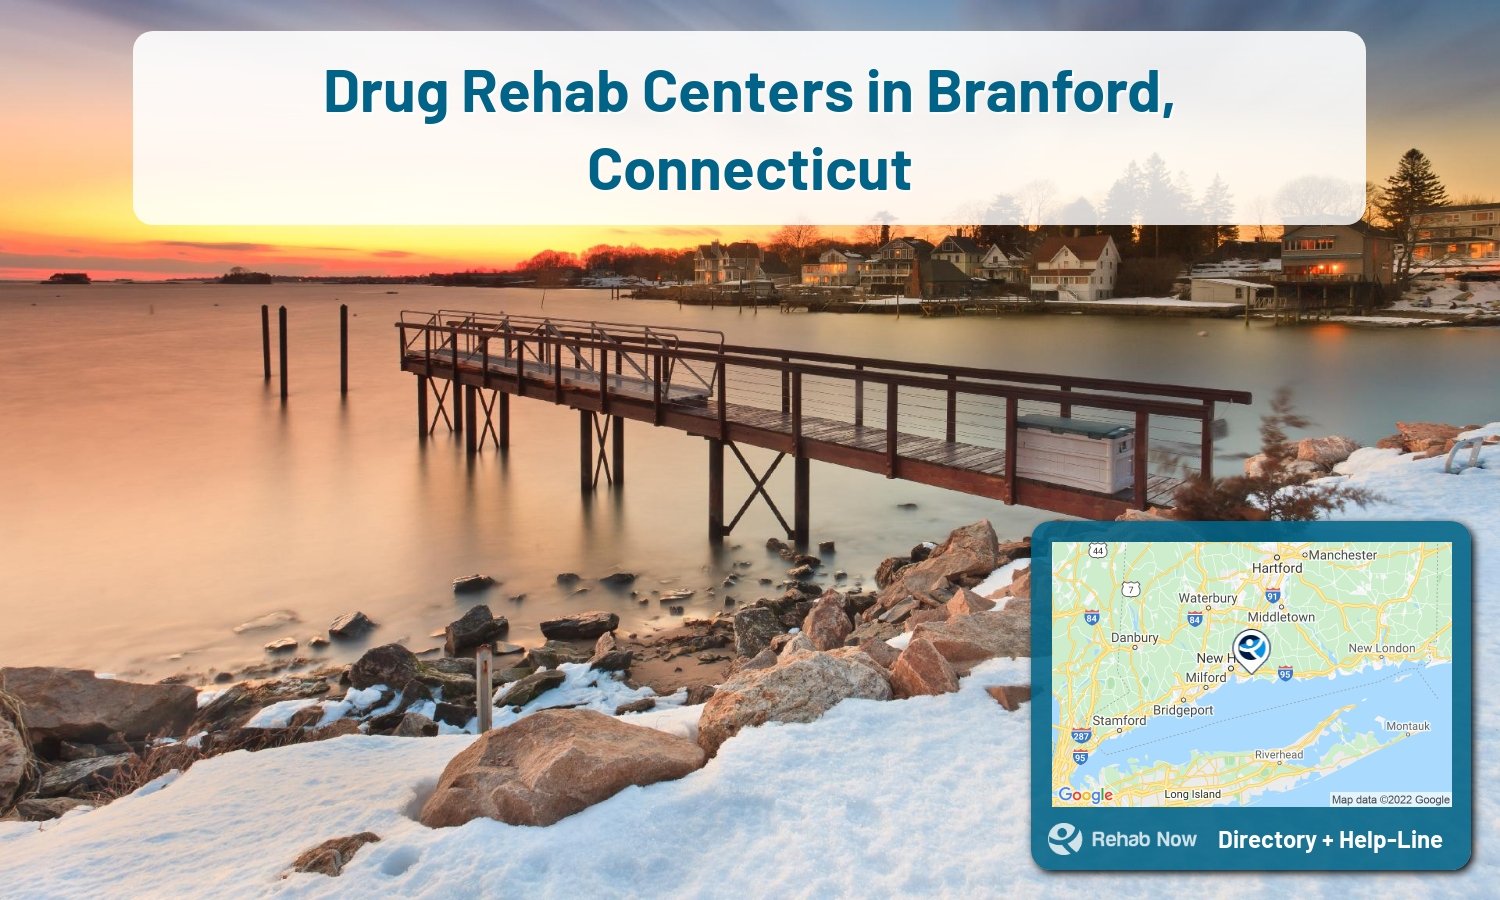 Find drug rehab and alcohol treatment services in Branford. Our experts help you find a center in Branford, Connecticut